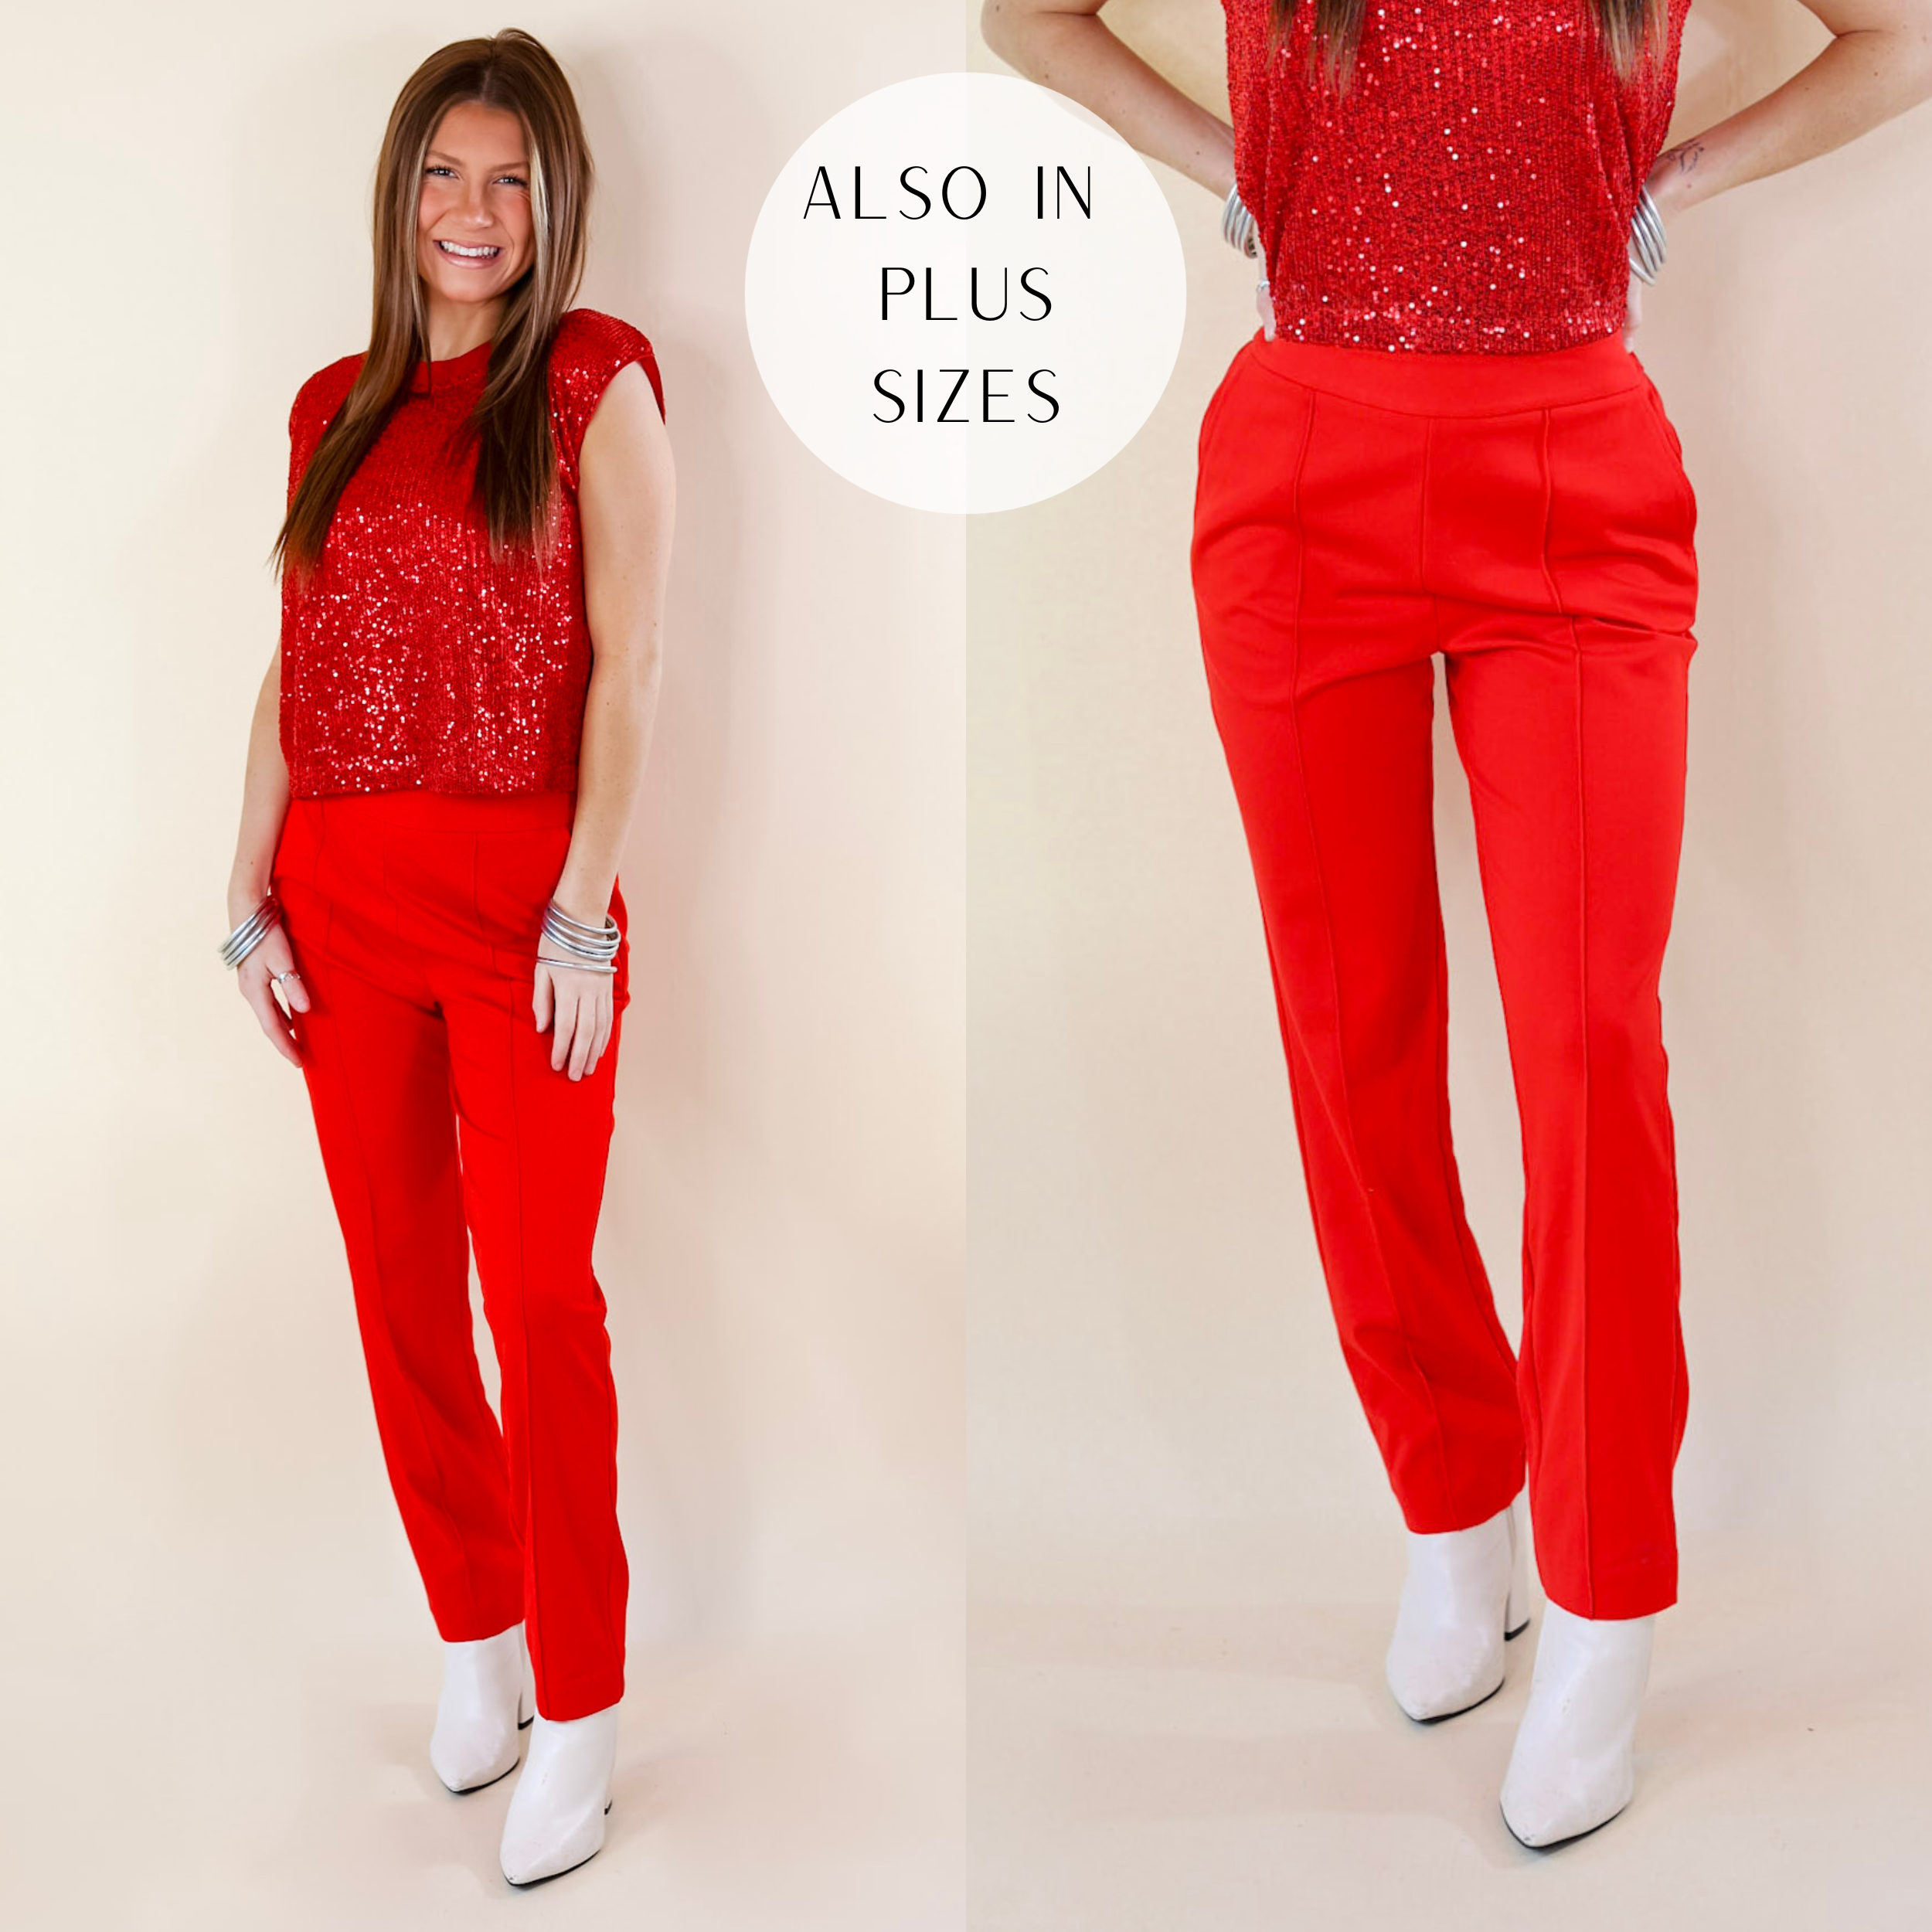 Model is wearing scarlet red trousers paired with the sequin sleek top, BuDhaGirl bracelets, and white boties.